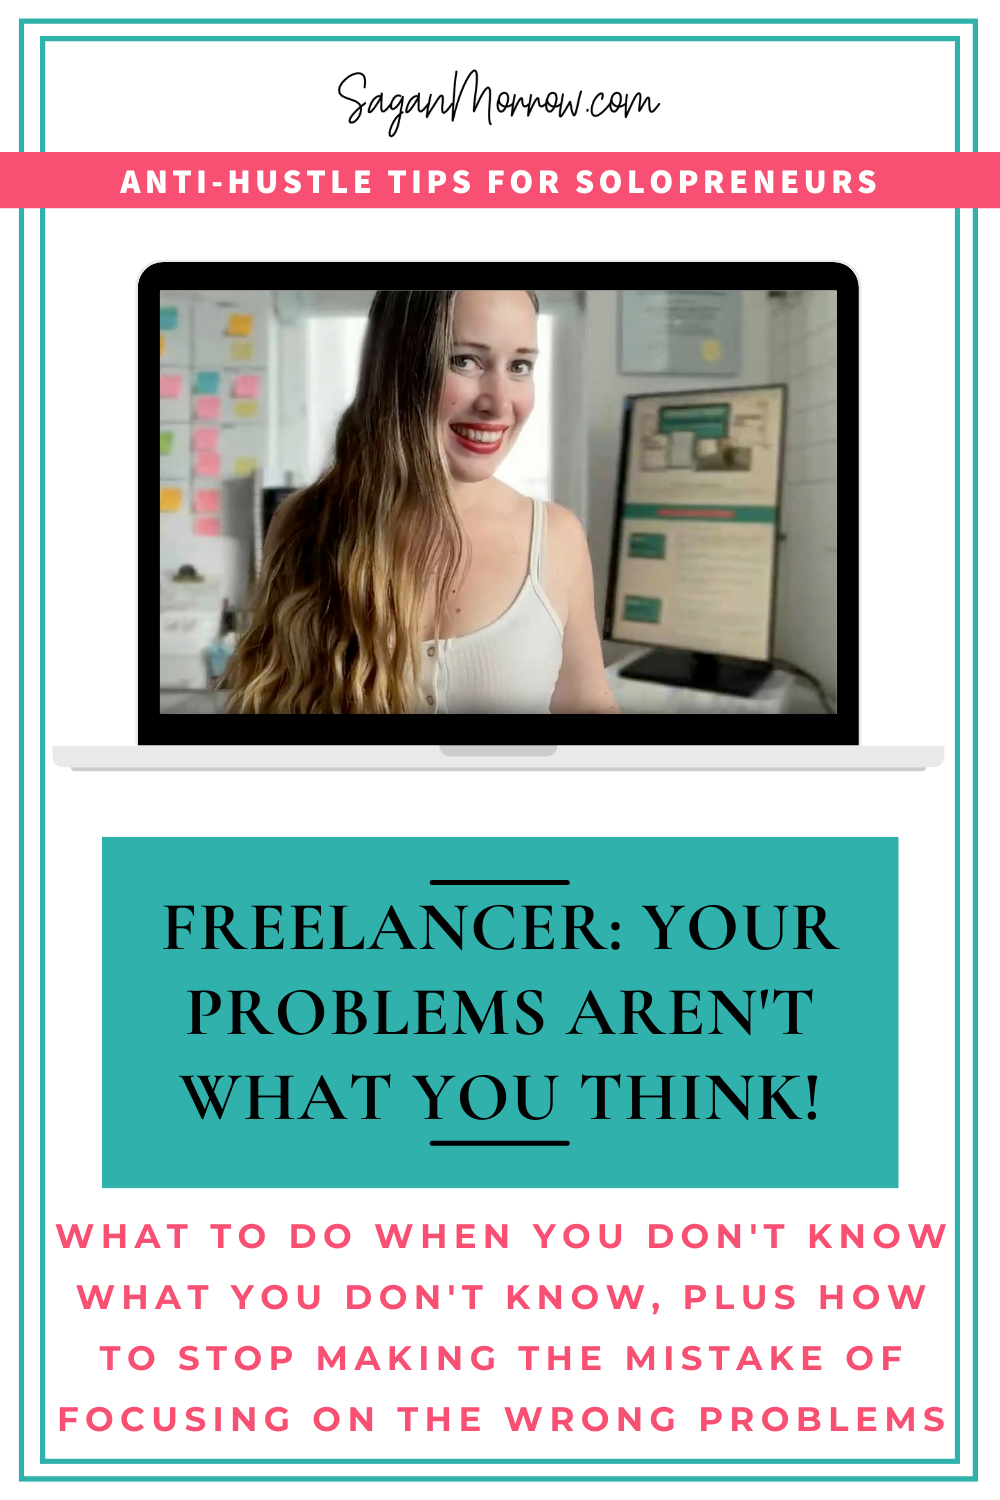 Freelancing mistakes - what to do when you don't know what you don't know... One of the things that often comes up for freelancers and other business owners is this whole question of, "What if I don't even know what I don't know? How can I overcome my business problems and my business struggles if there is something going on that I can't even see?"

A common freelancing mistake is that most freelancers accidentally focus on the WRONG problems in business, because *they don't know what they don't know*, and they don't realize that they're focusing on the wrong thing...

So what can you do to fix this? In this video, let's address what to do when you do not know what you don't know — so that you stop struggling and start succeeding as a freelancer!